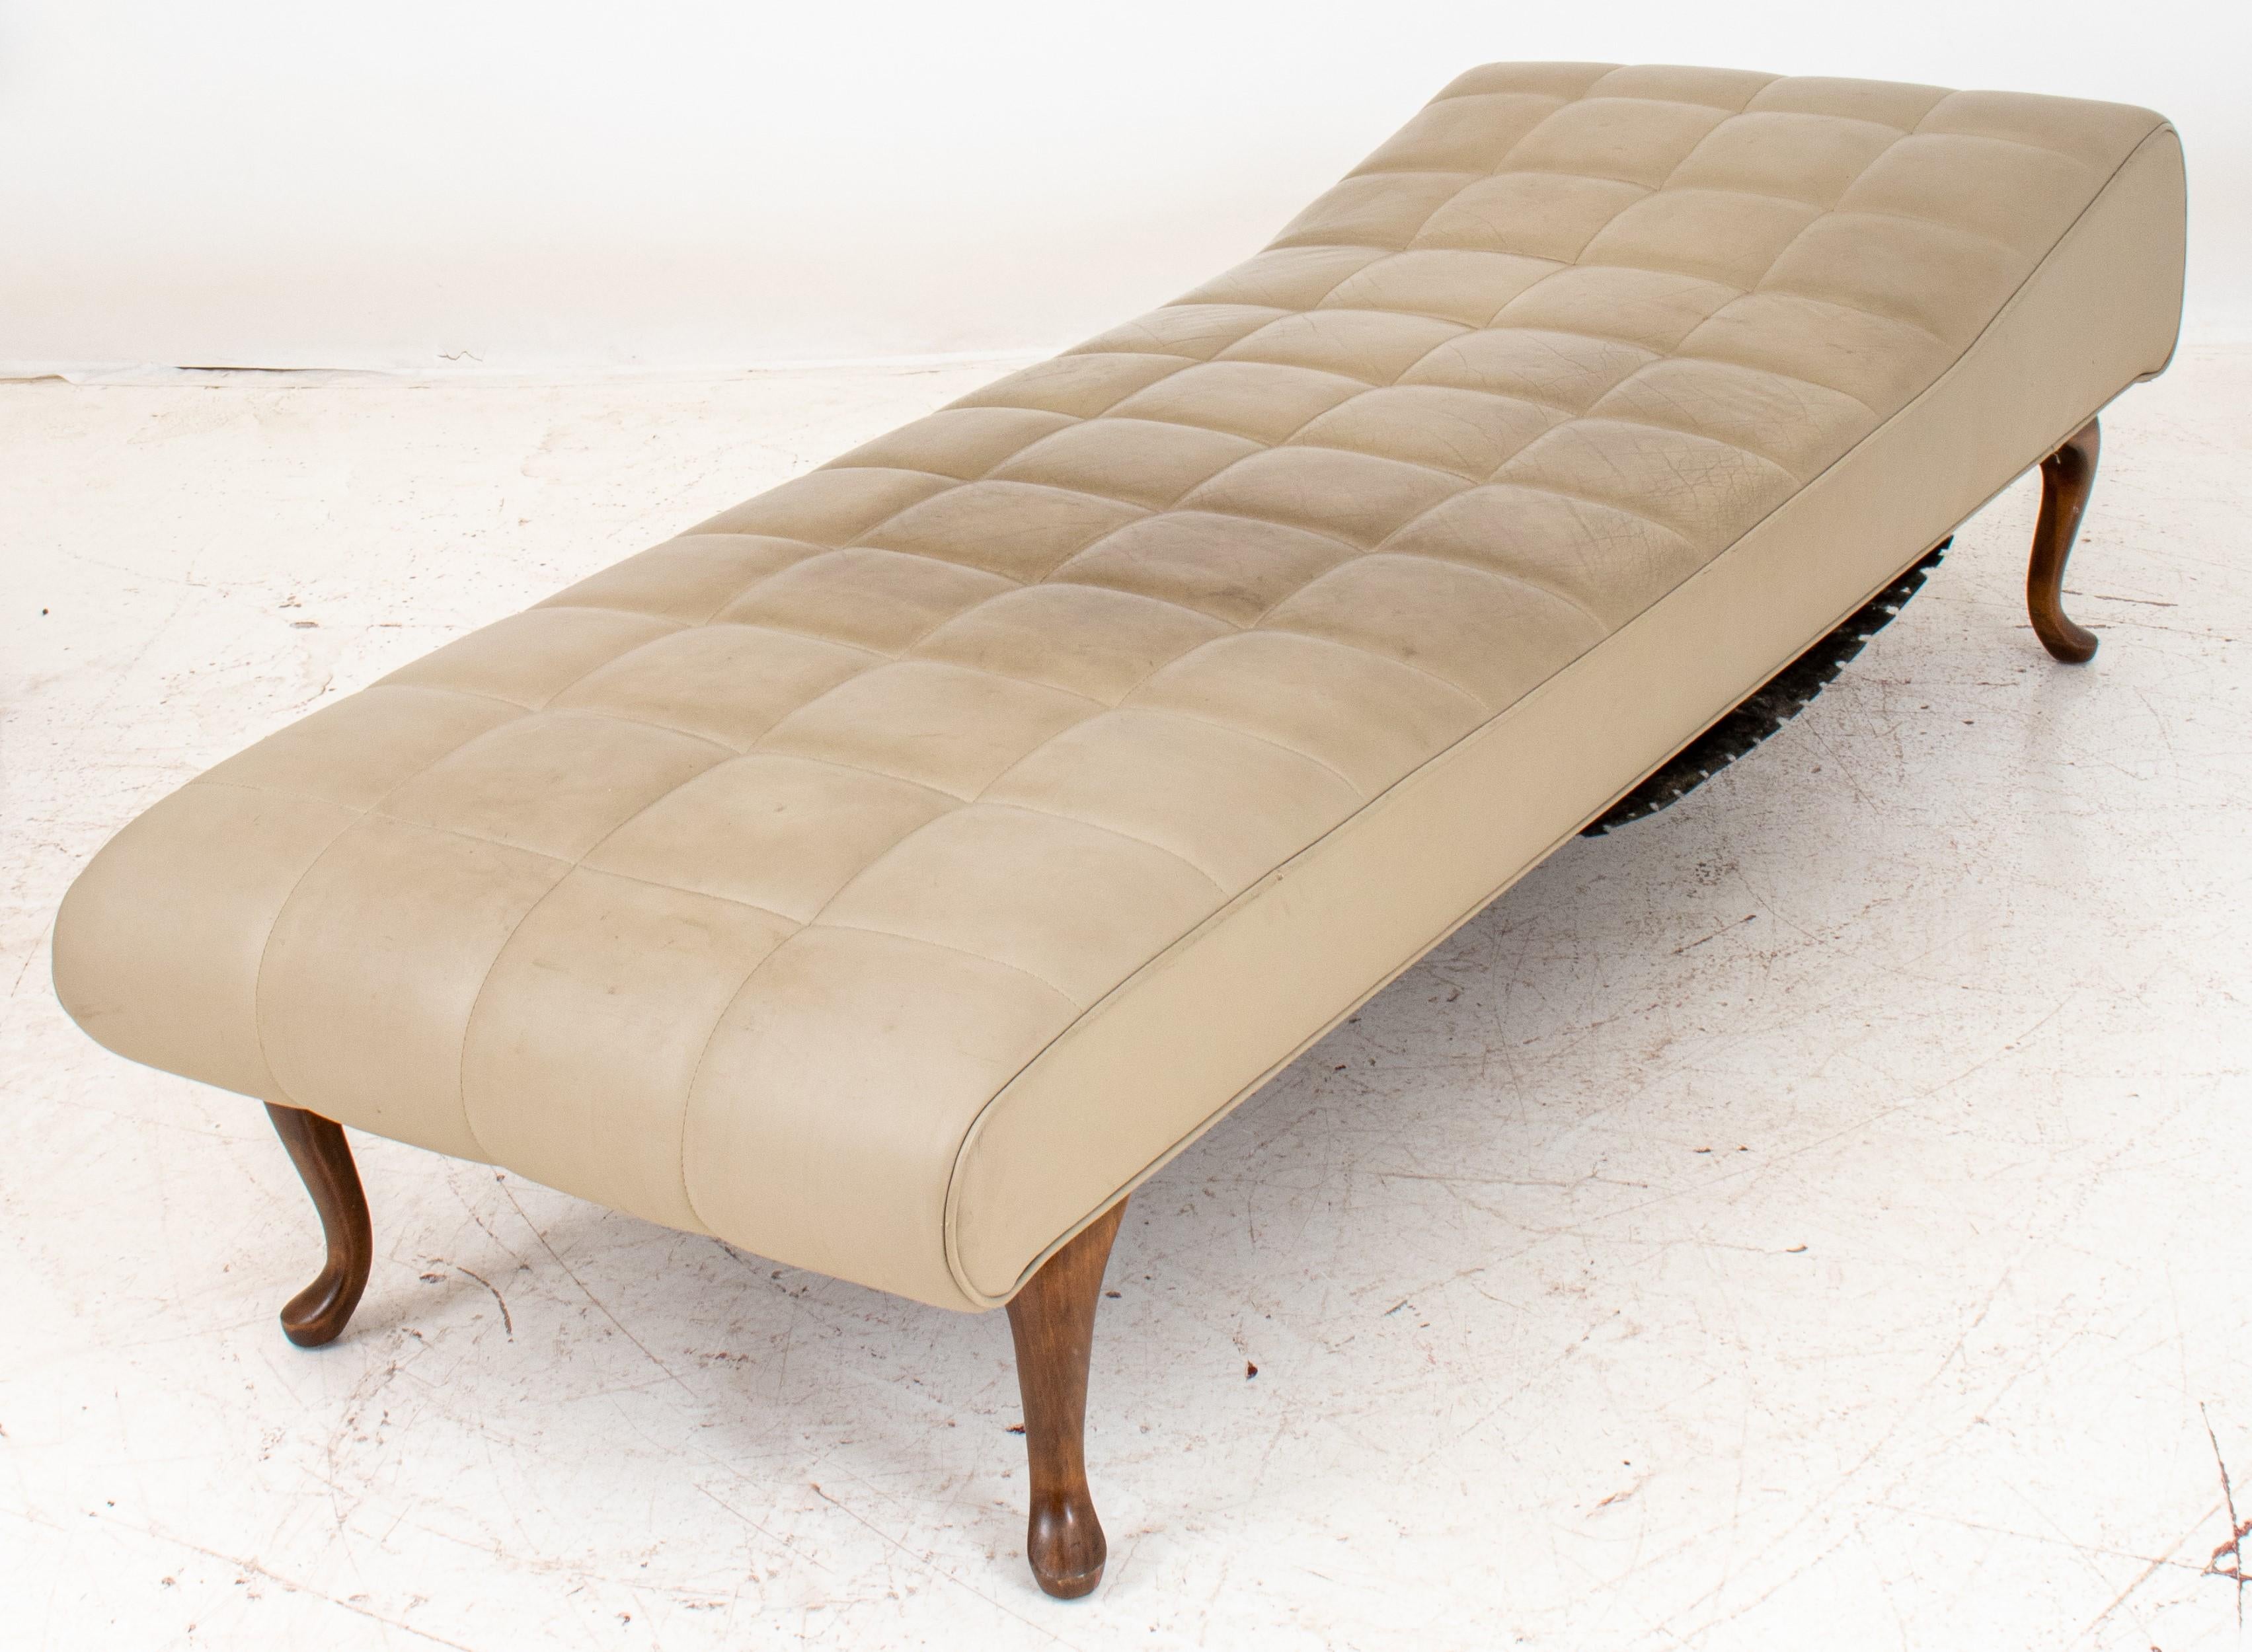 
It appears you've described a versatile piece of furniture that can serve as a recovery sofa, daybed, or chaise lounge couch. Here are the details:

Style: The description doesn't specify a particular style, but it mentions Queen Anne Style wood